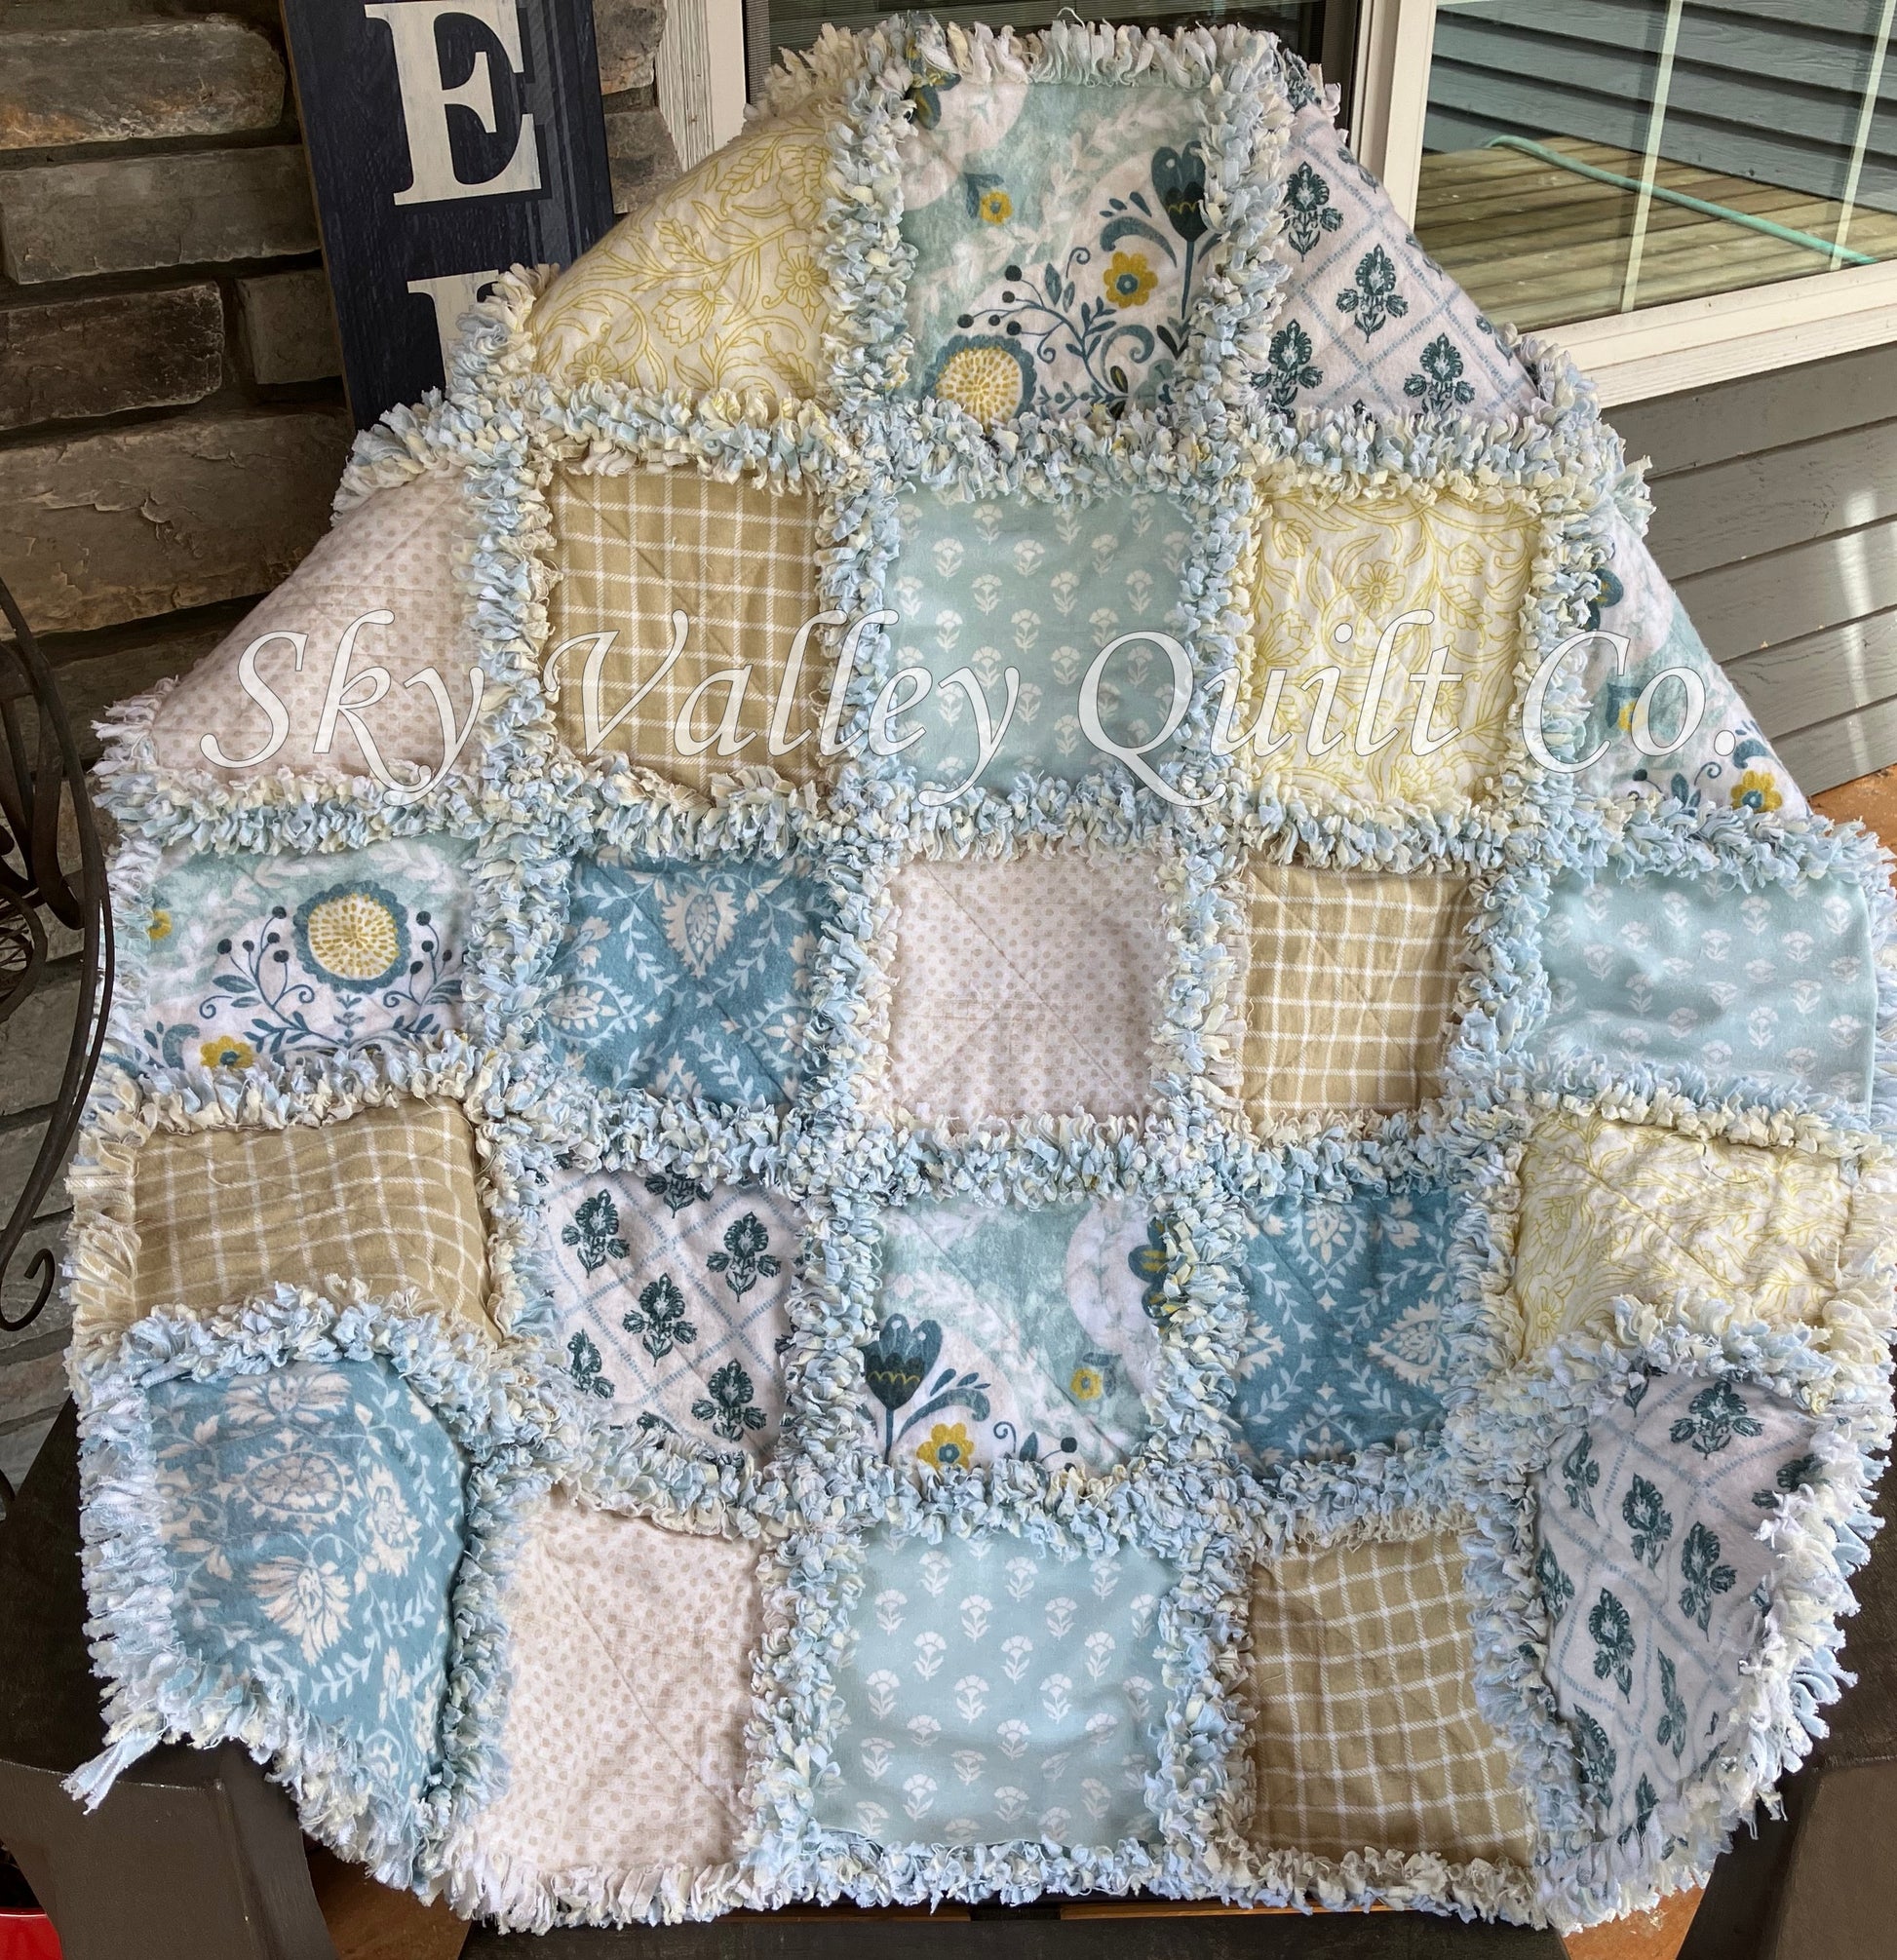 Finished rag quilt - seaside cottage florals blues, greens, tans and gold